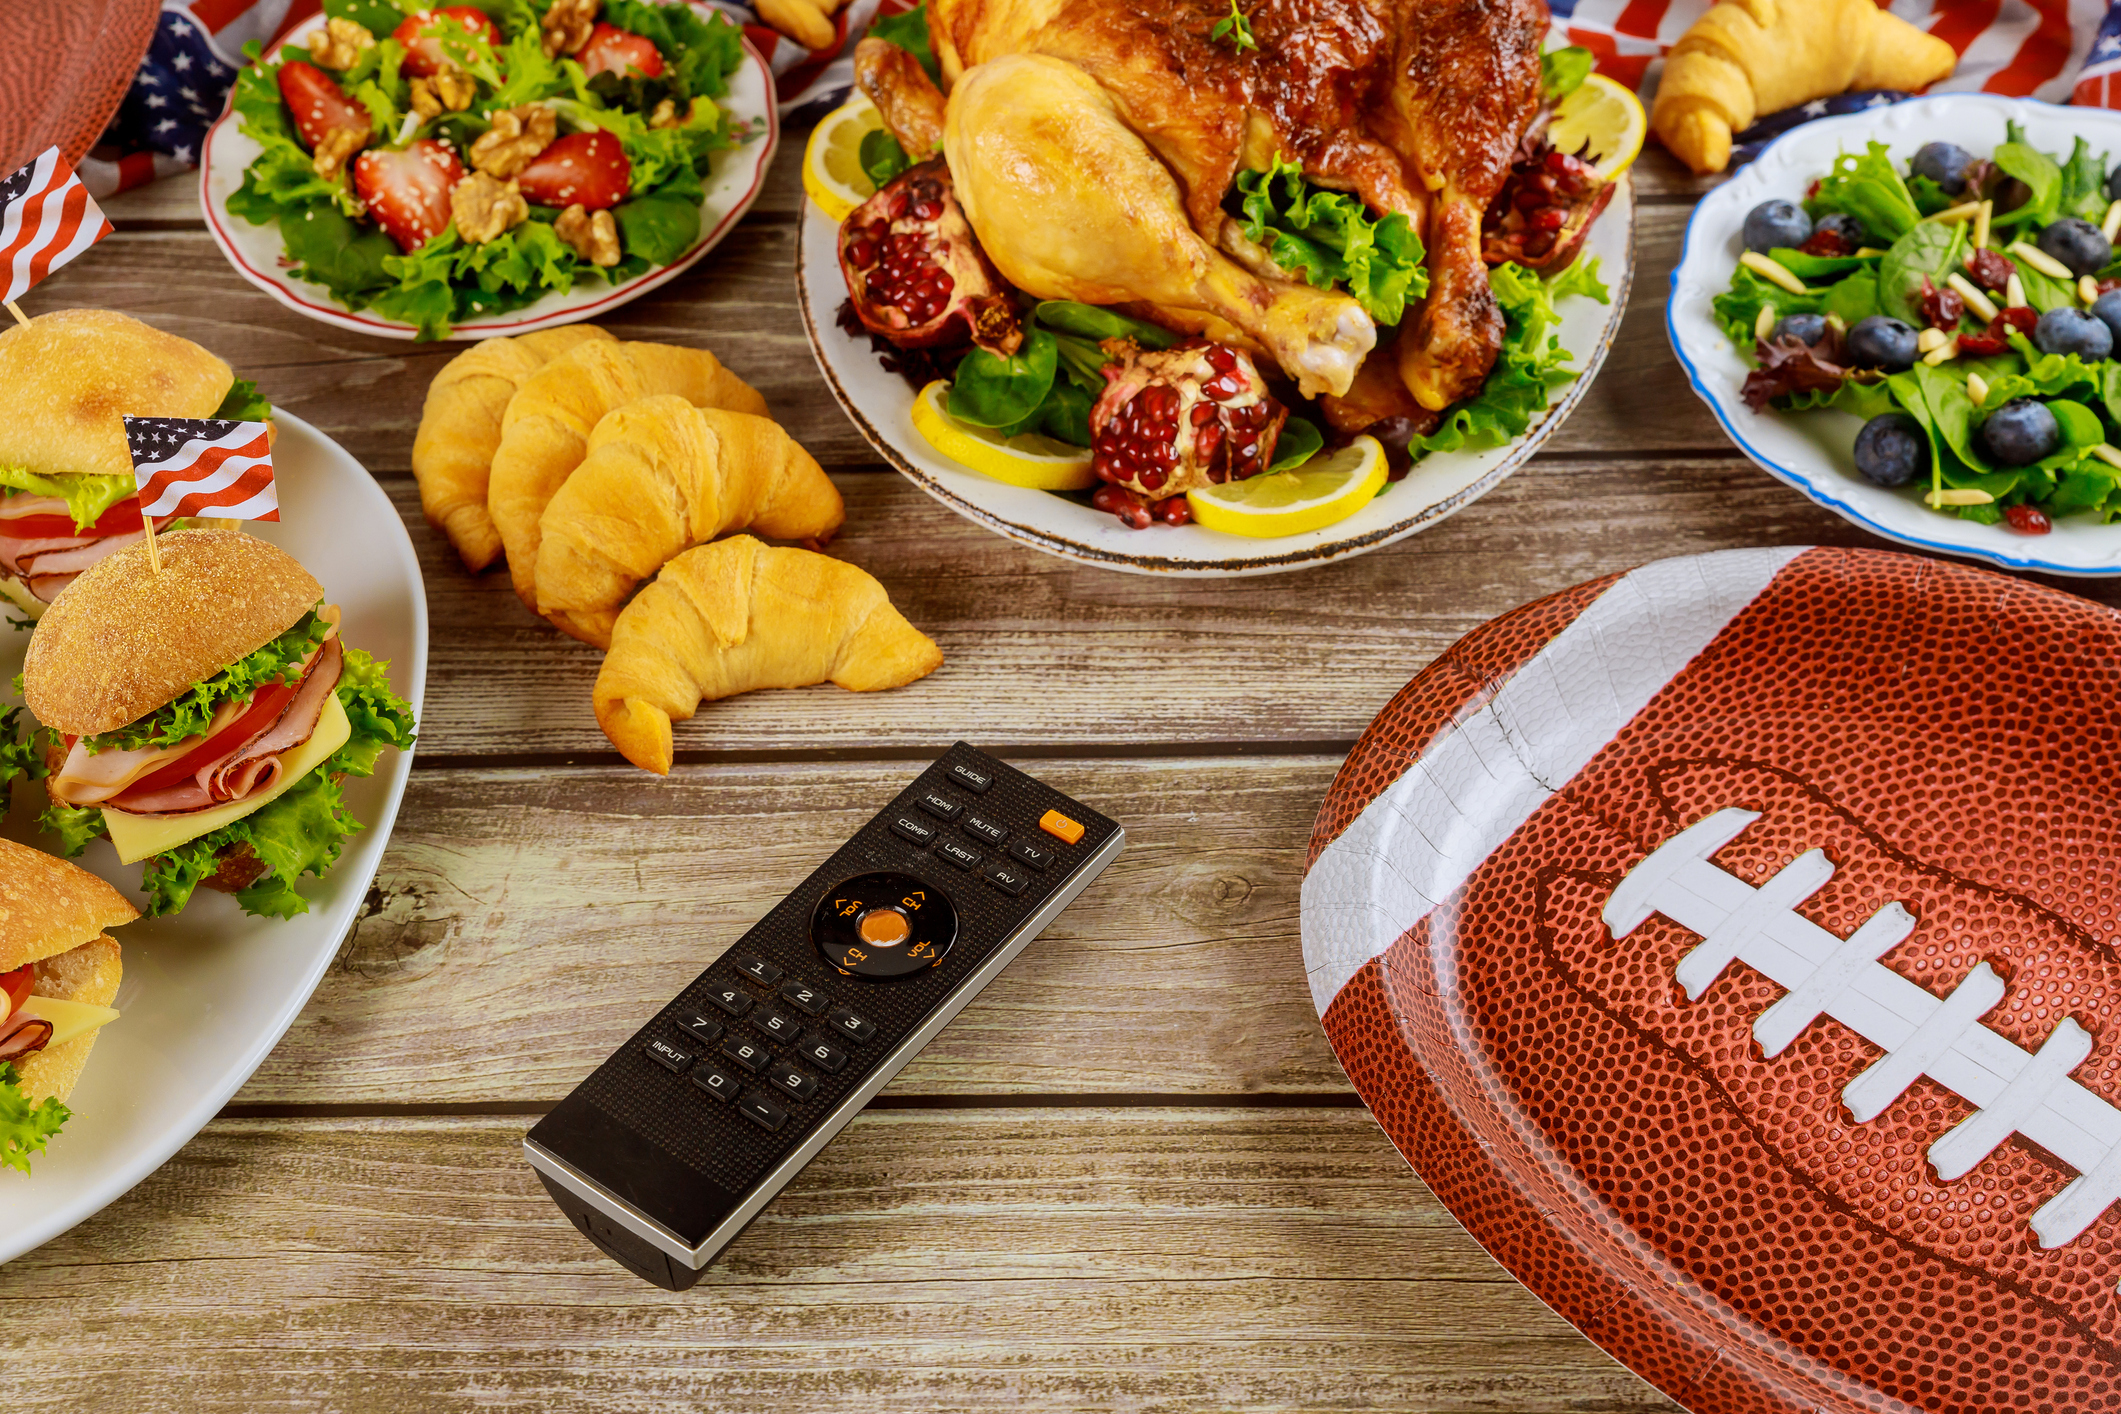 Party table with remote control for sport watching american football game on tv. (Photo: iStock - 500)